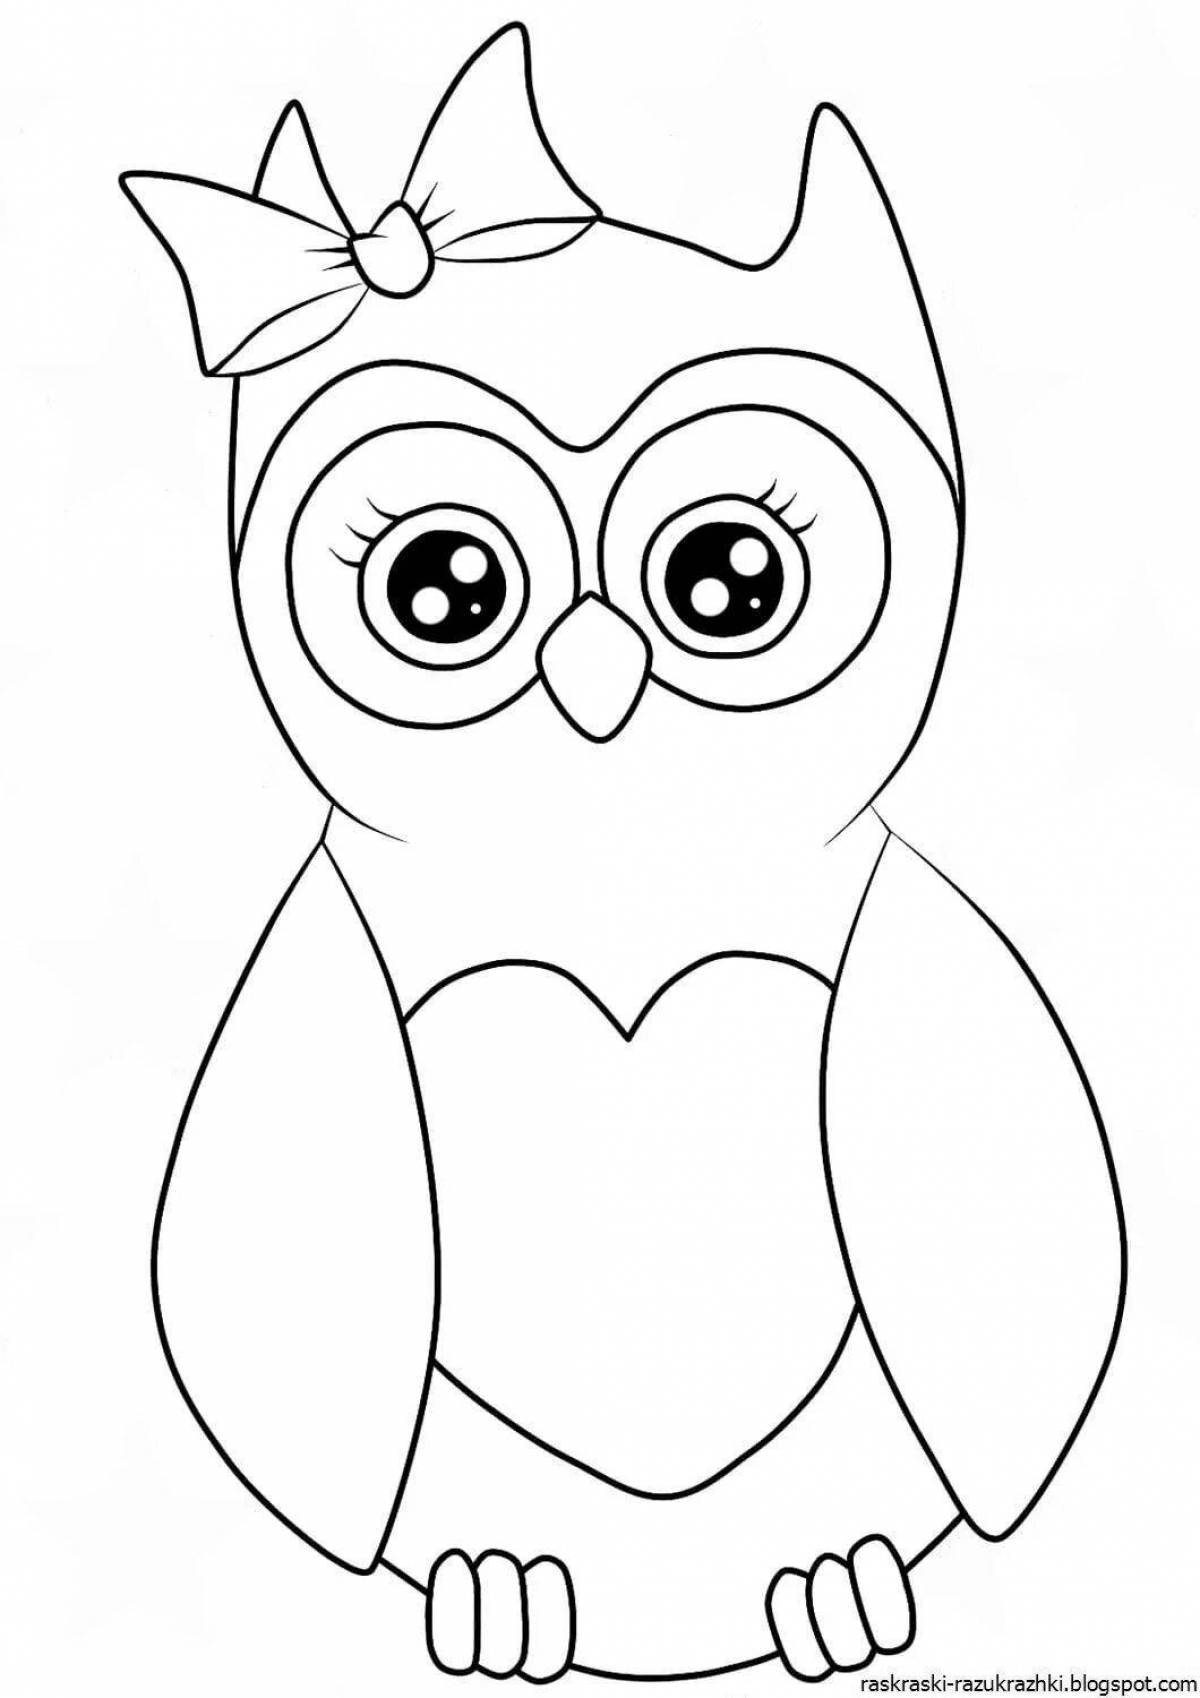 Coloring book shining owlet for juniors